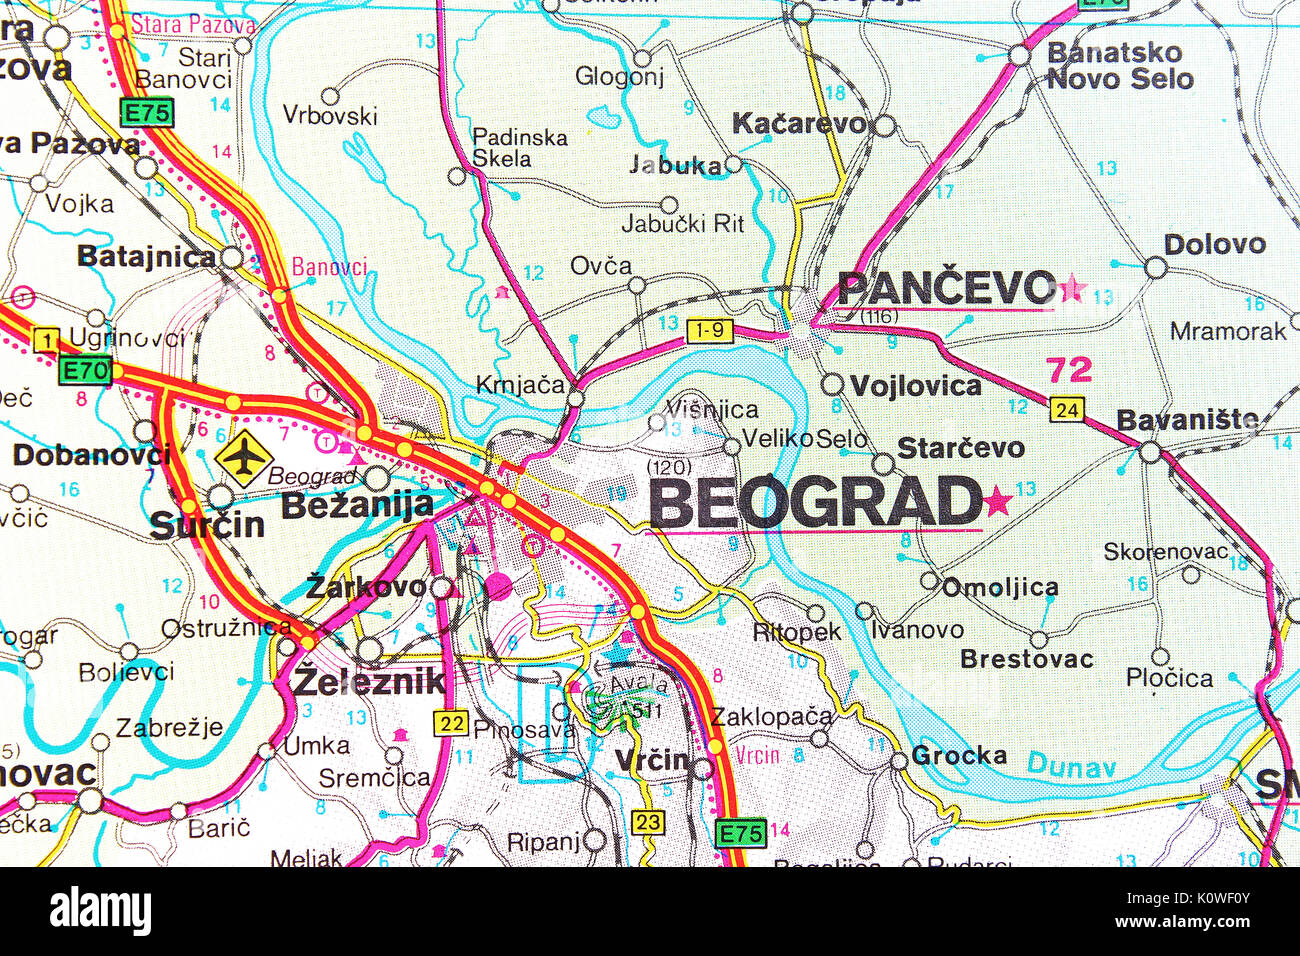 Beograd map city map road map Stock Photo: 155453899 - Alamy